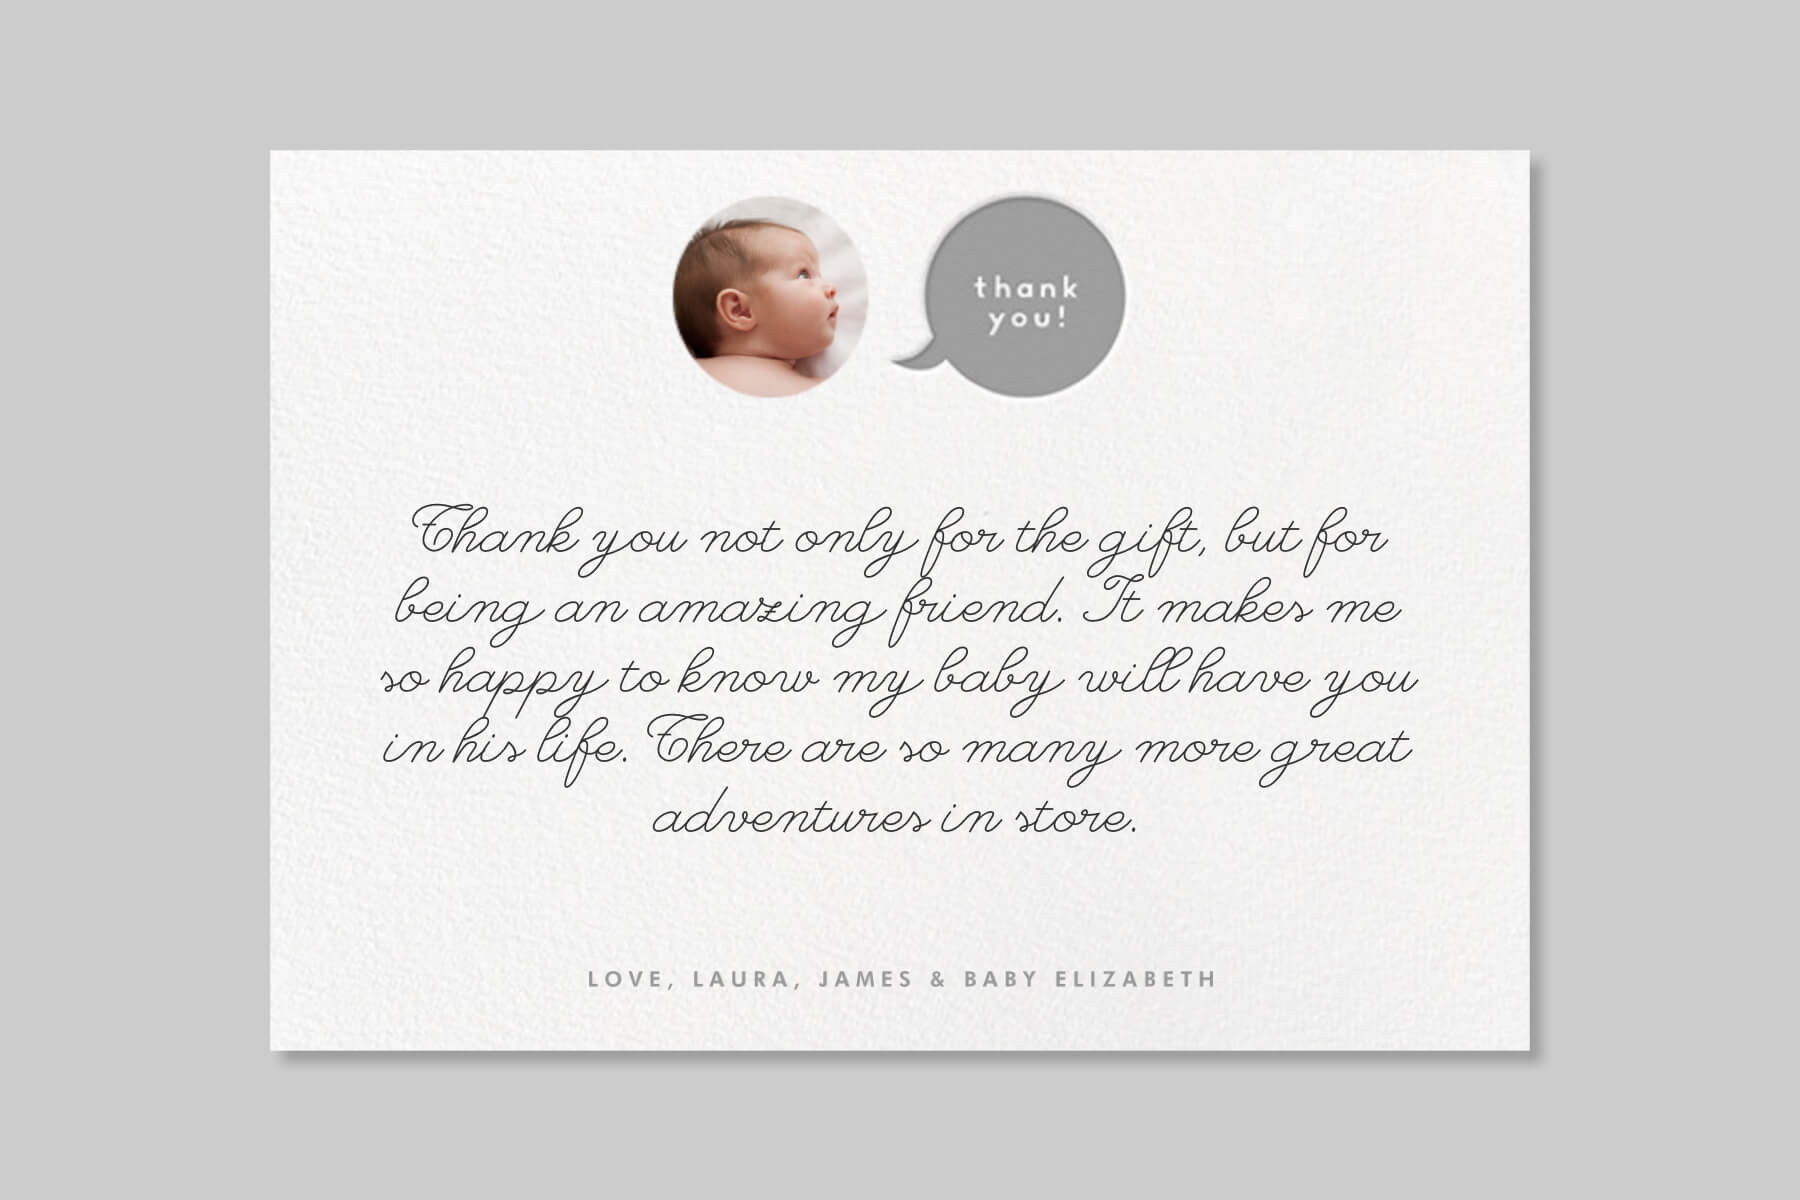 Thank You Note Examples Baby Shower | lupon.gov.ph